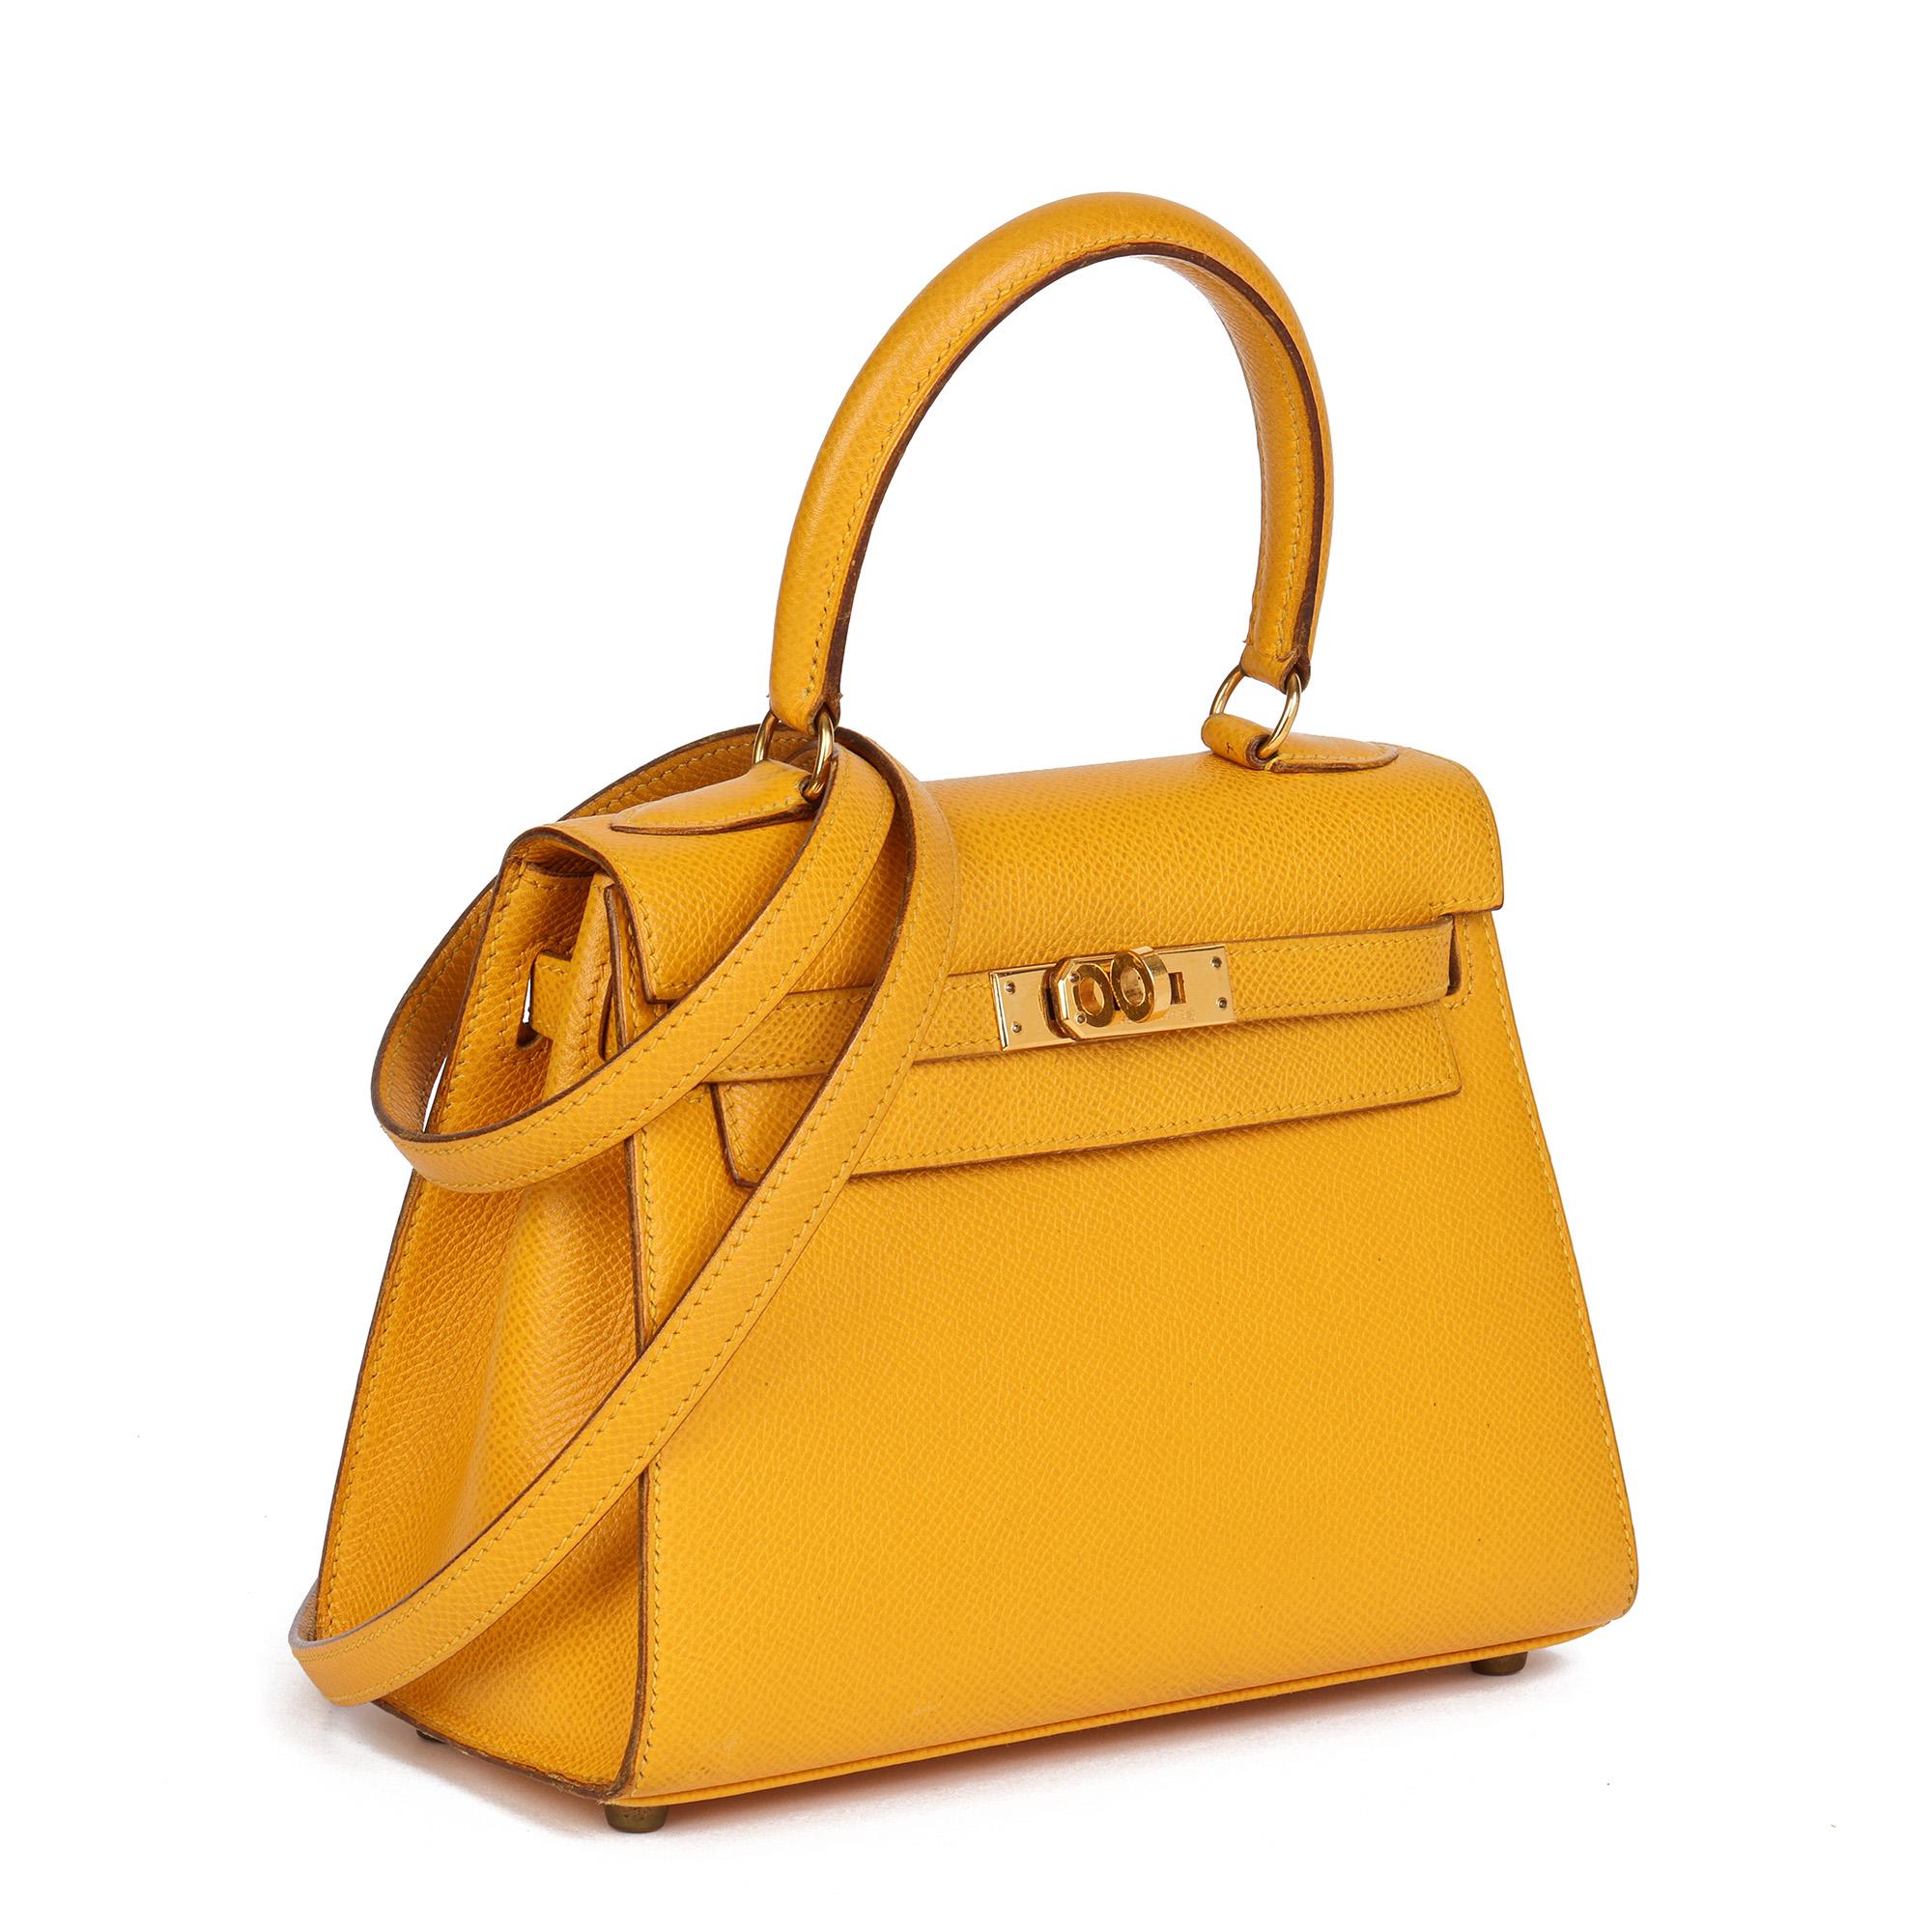 Hermès JAUNE COURCHEVEL LEATHER KELLY 20CM SELLIER

CONDITION NOTES
The exterior is in very good condition with moderate signs of use, with darkening on the handle and small marks on the leather.
The interior is in excellent condition with light